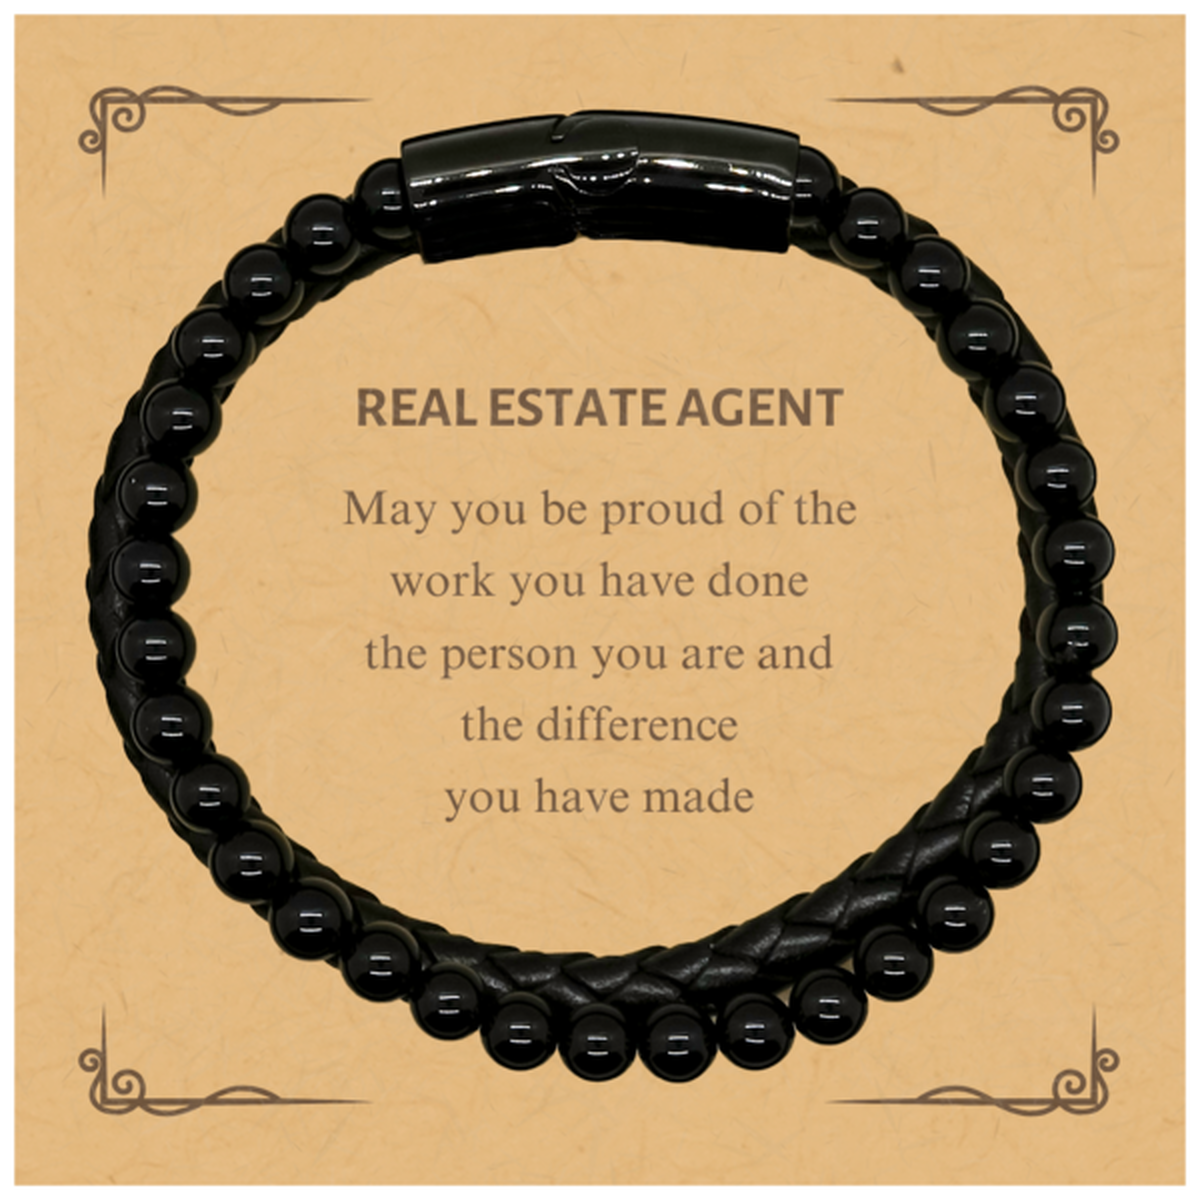 Real Estate Agent May you be proud of the work you have done, Retirement Real Estate Agent Stone Leather Bracelets for Colleague Appreciation Gifts Amazing for Real Estate Agent